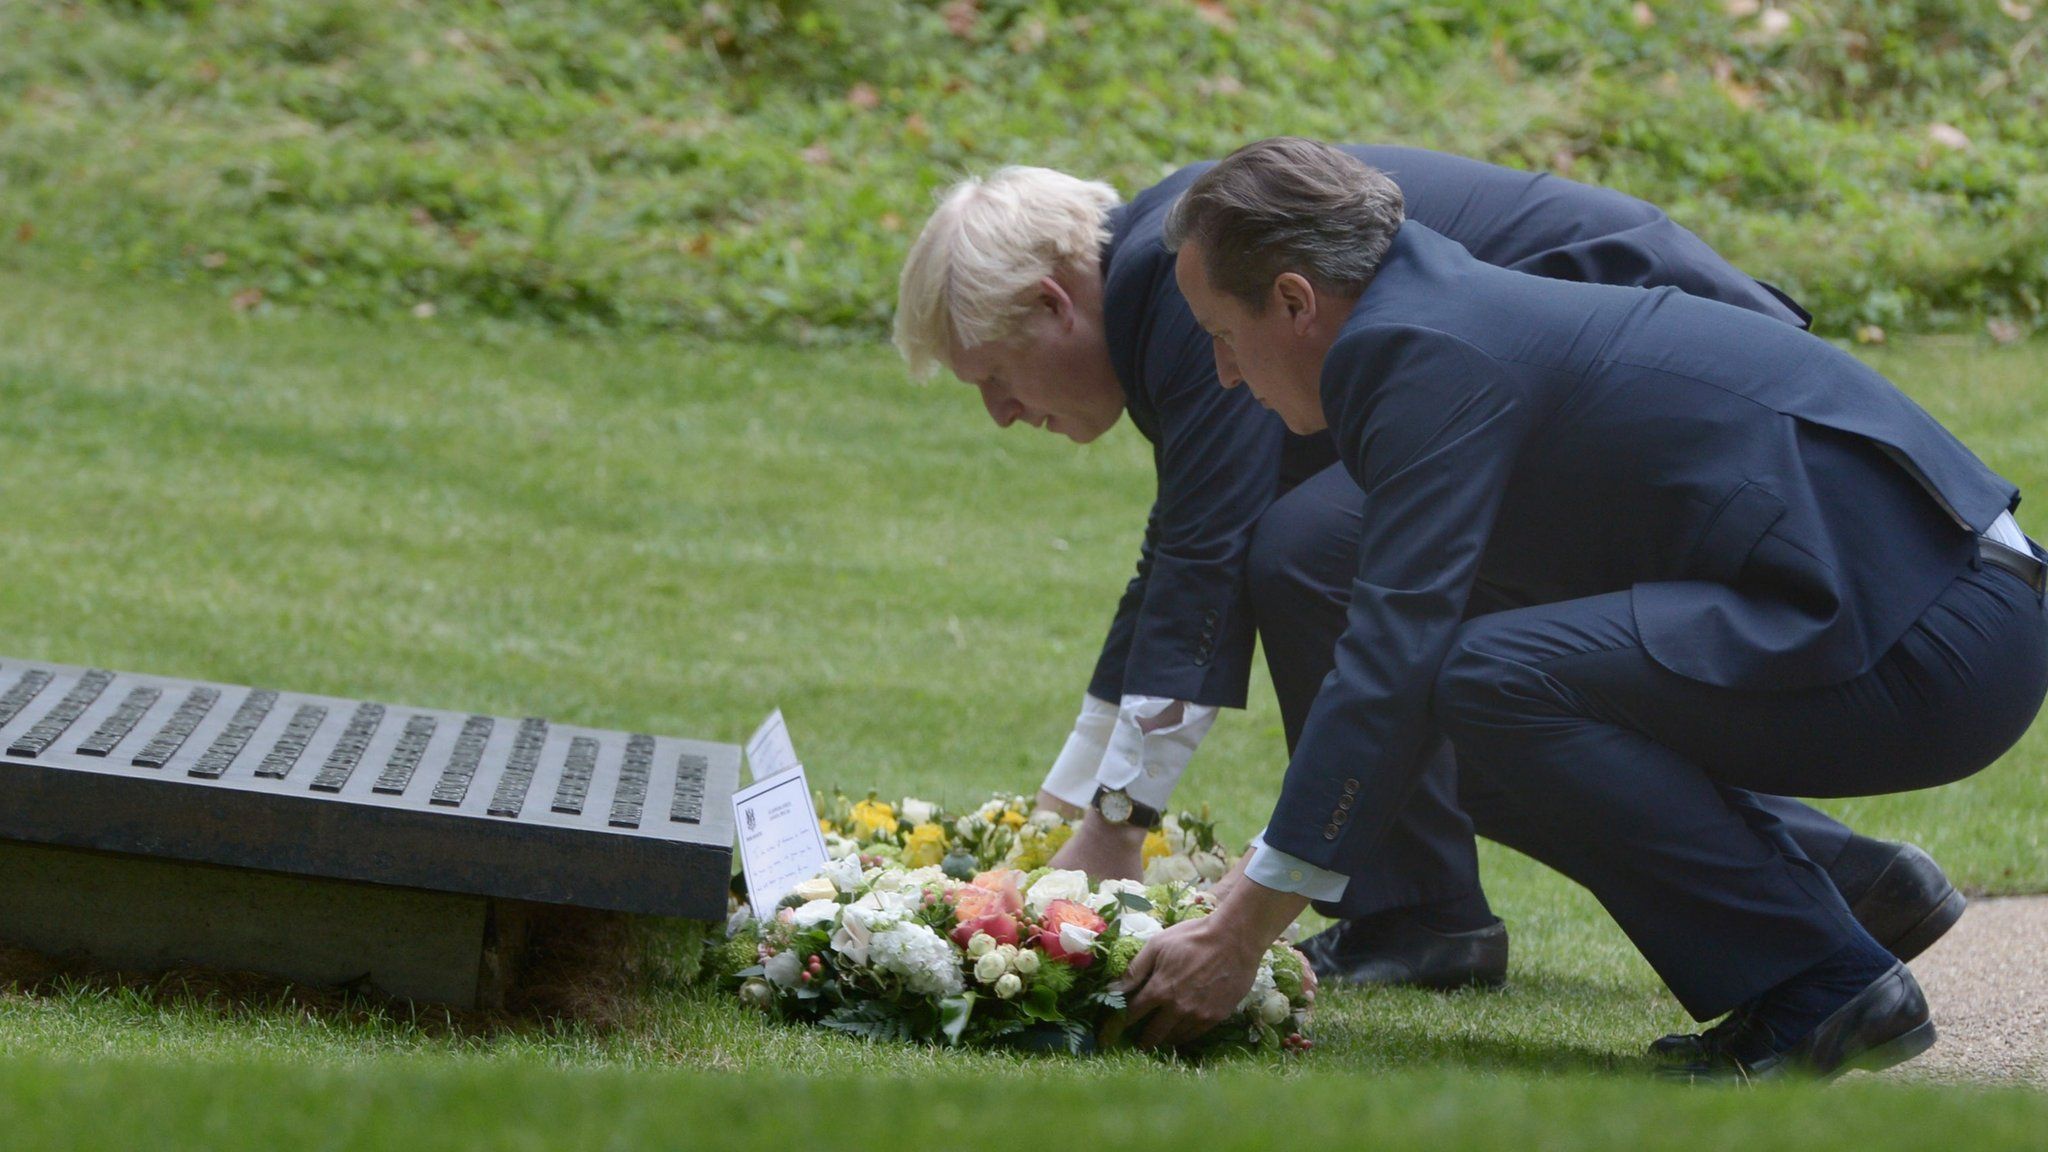 London Mayor Boris Johnson (left) and British Prime Minister David Cameron carry wreathes at the July 7 memorial in Hyde Park, London